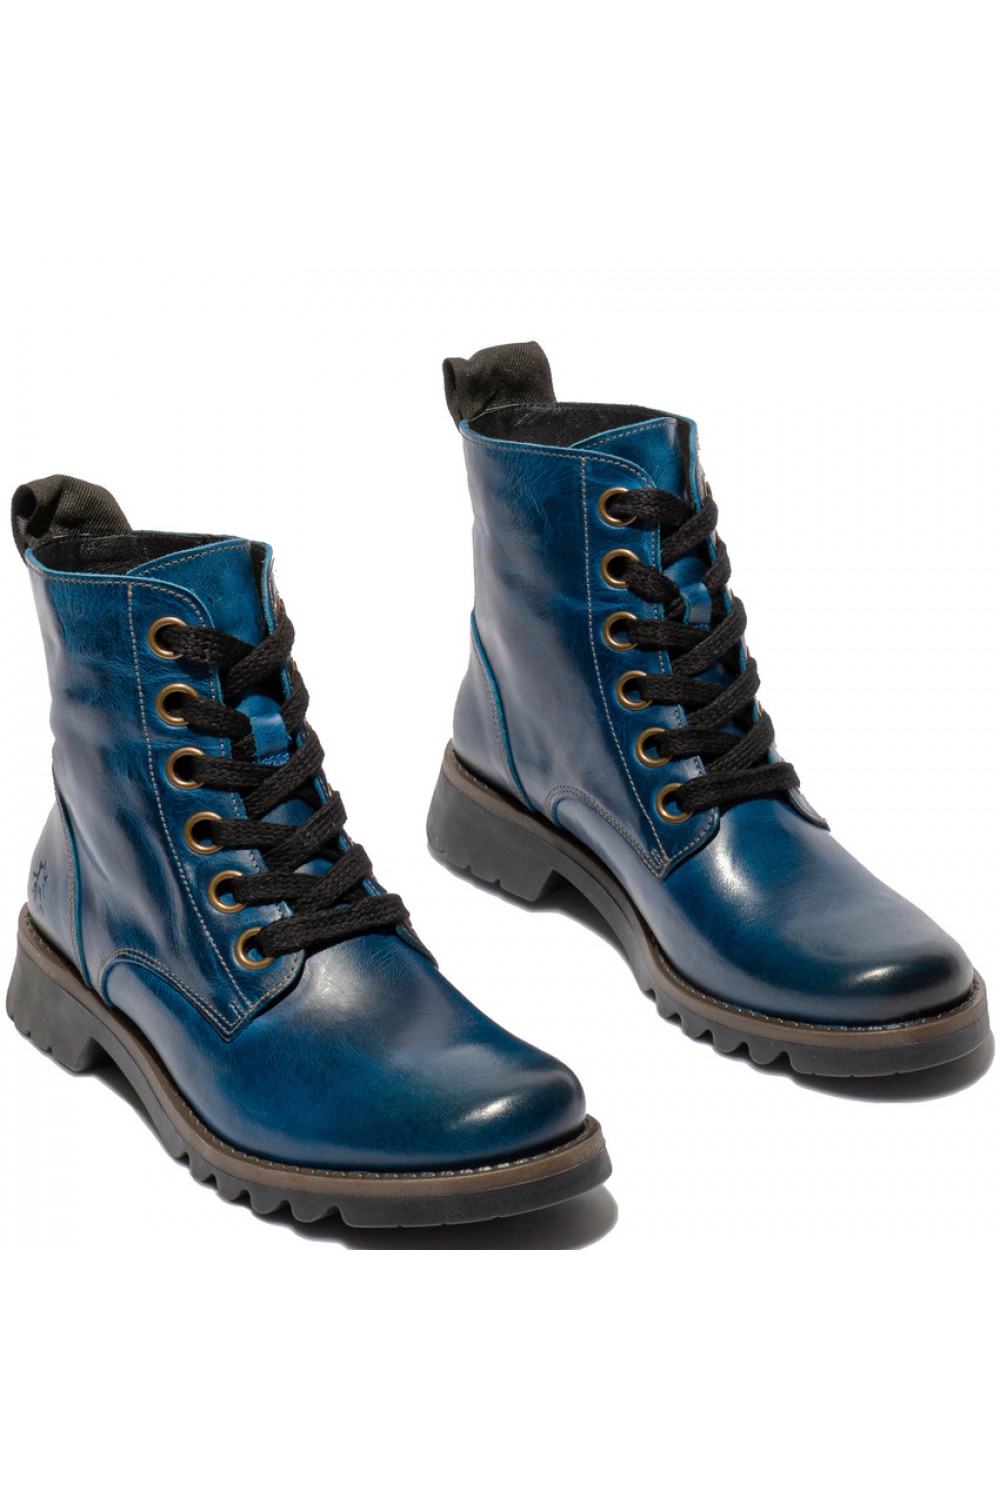 FLY LONDON Ragi539 Military Style Lace Up Boot Royal Blue